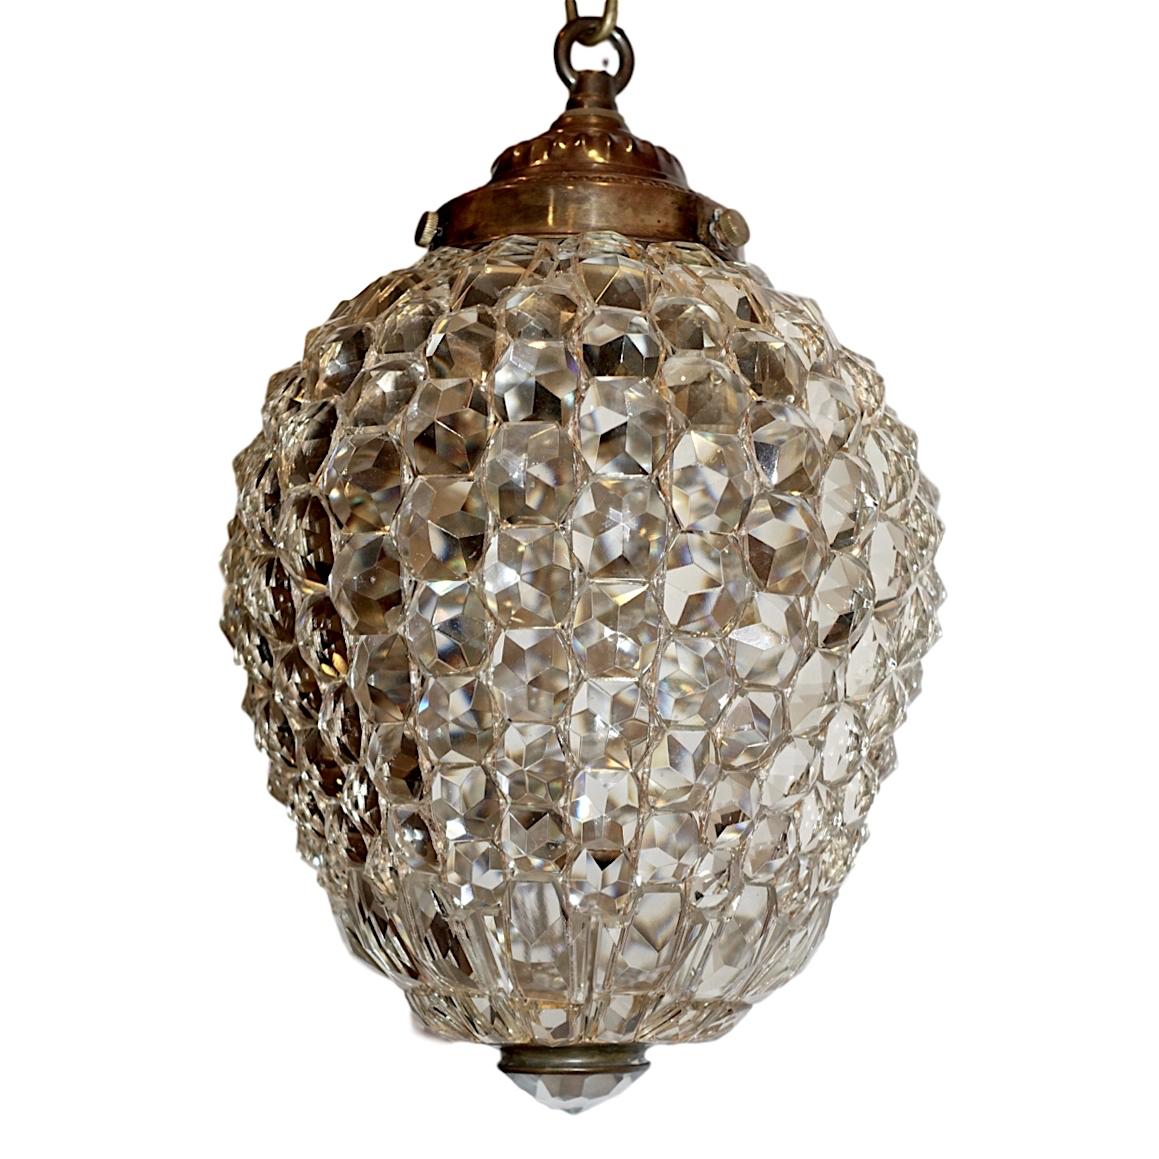 A circa 1920s French clear crystal pendant light fixture with interior light.

Measurements:
Current drop 16